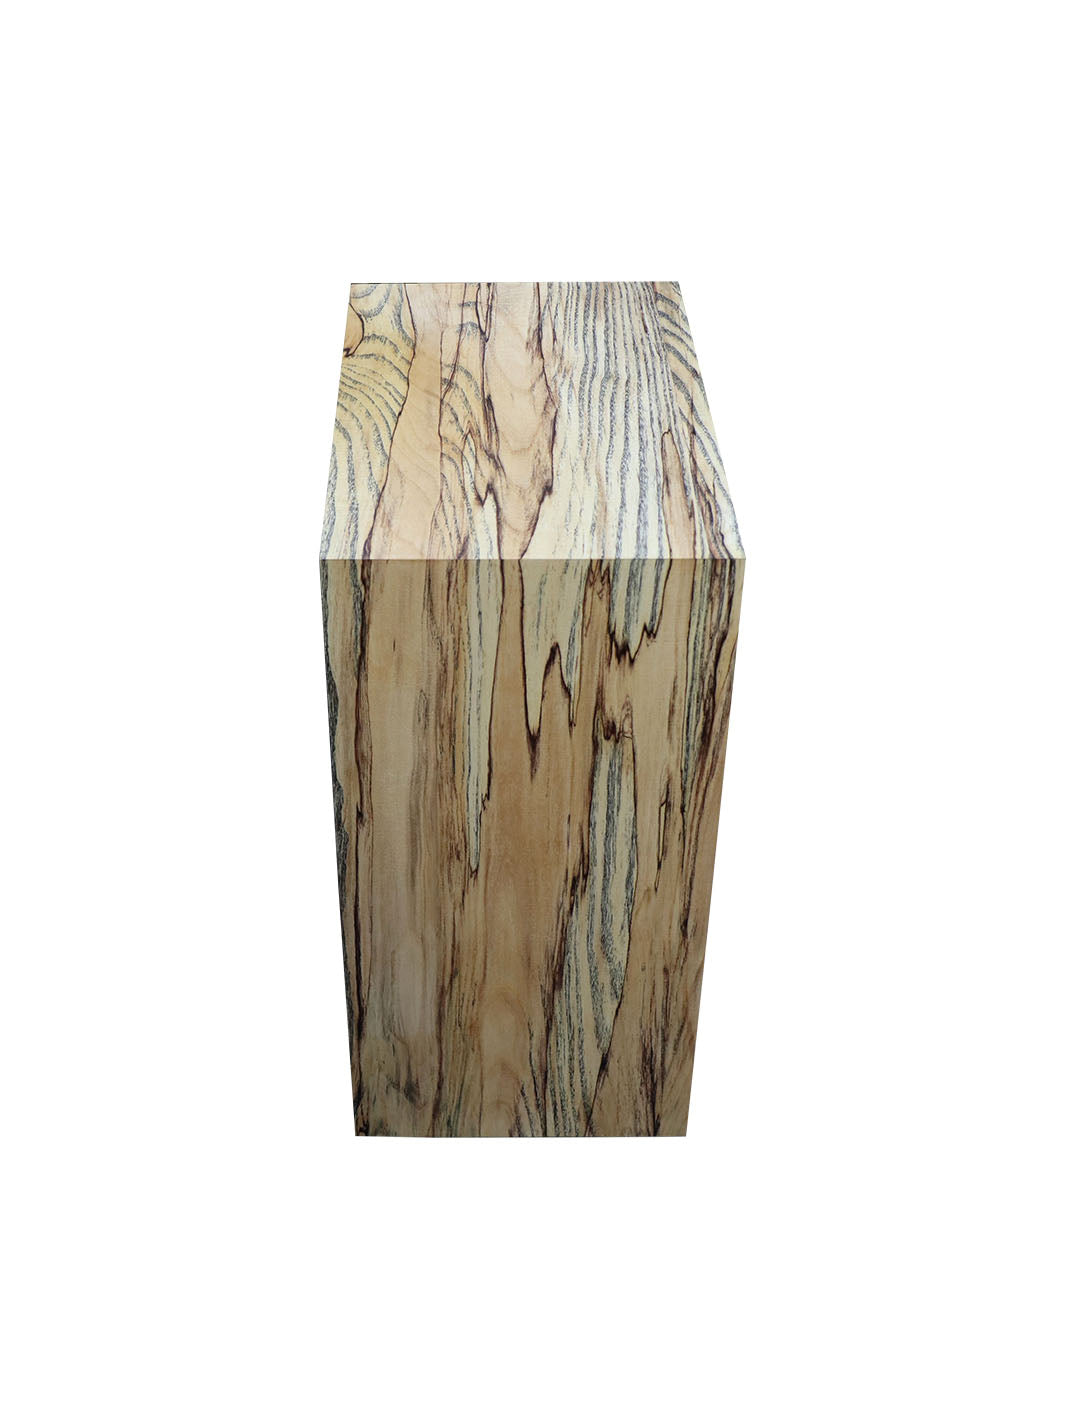 Spalted Maple Waterfall C-Table Earthly Comfort C Table -1